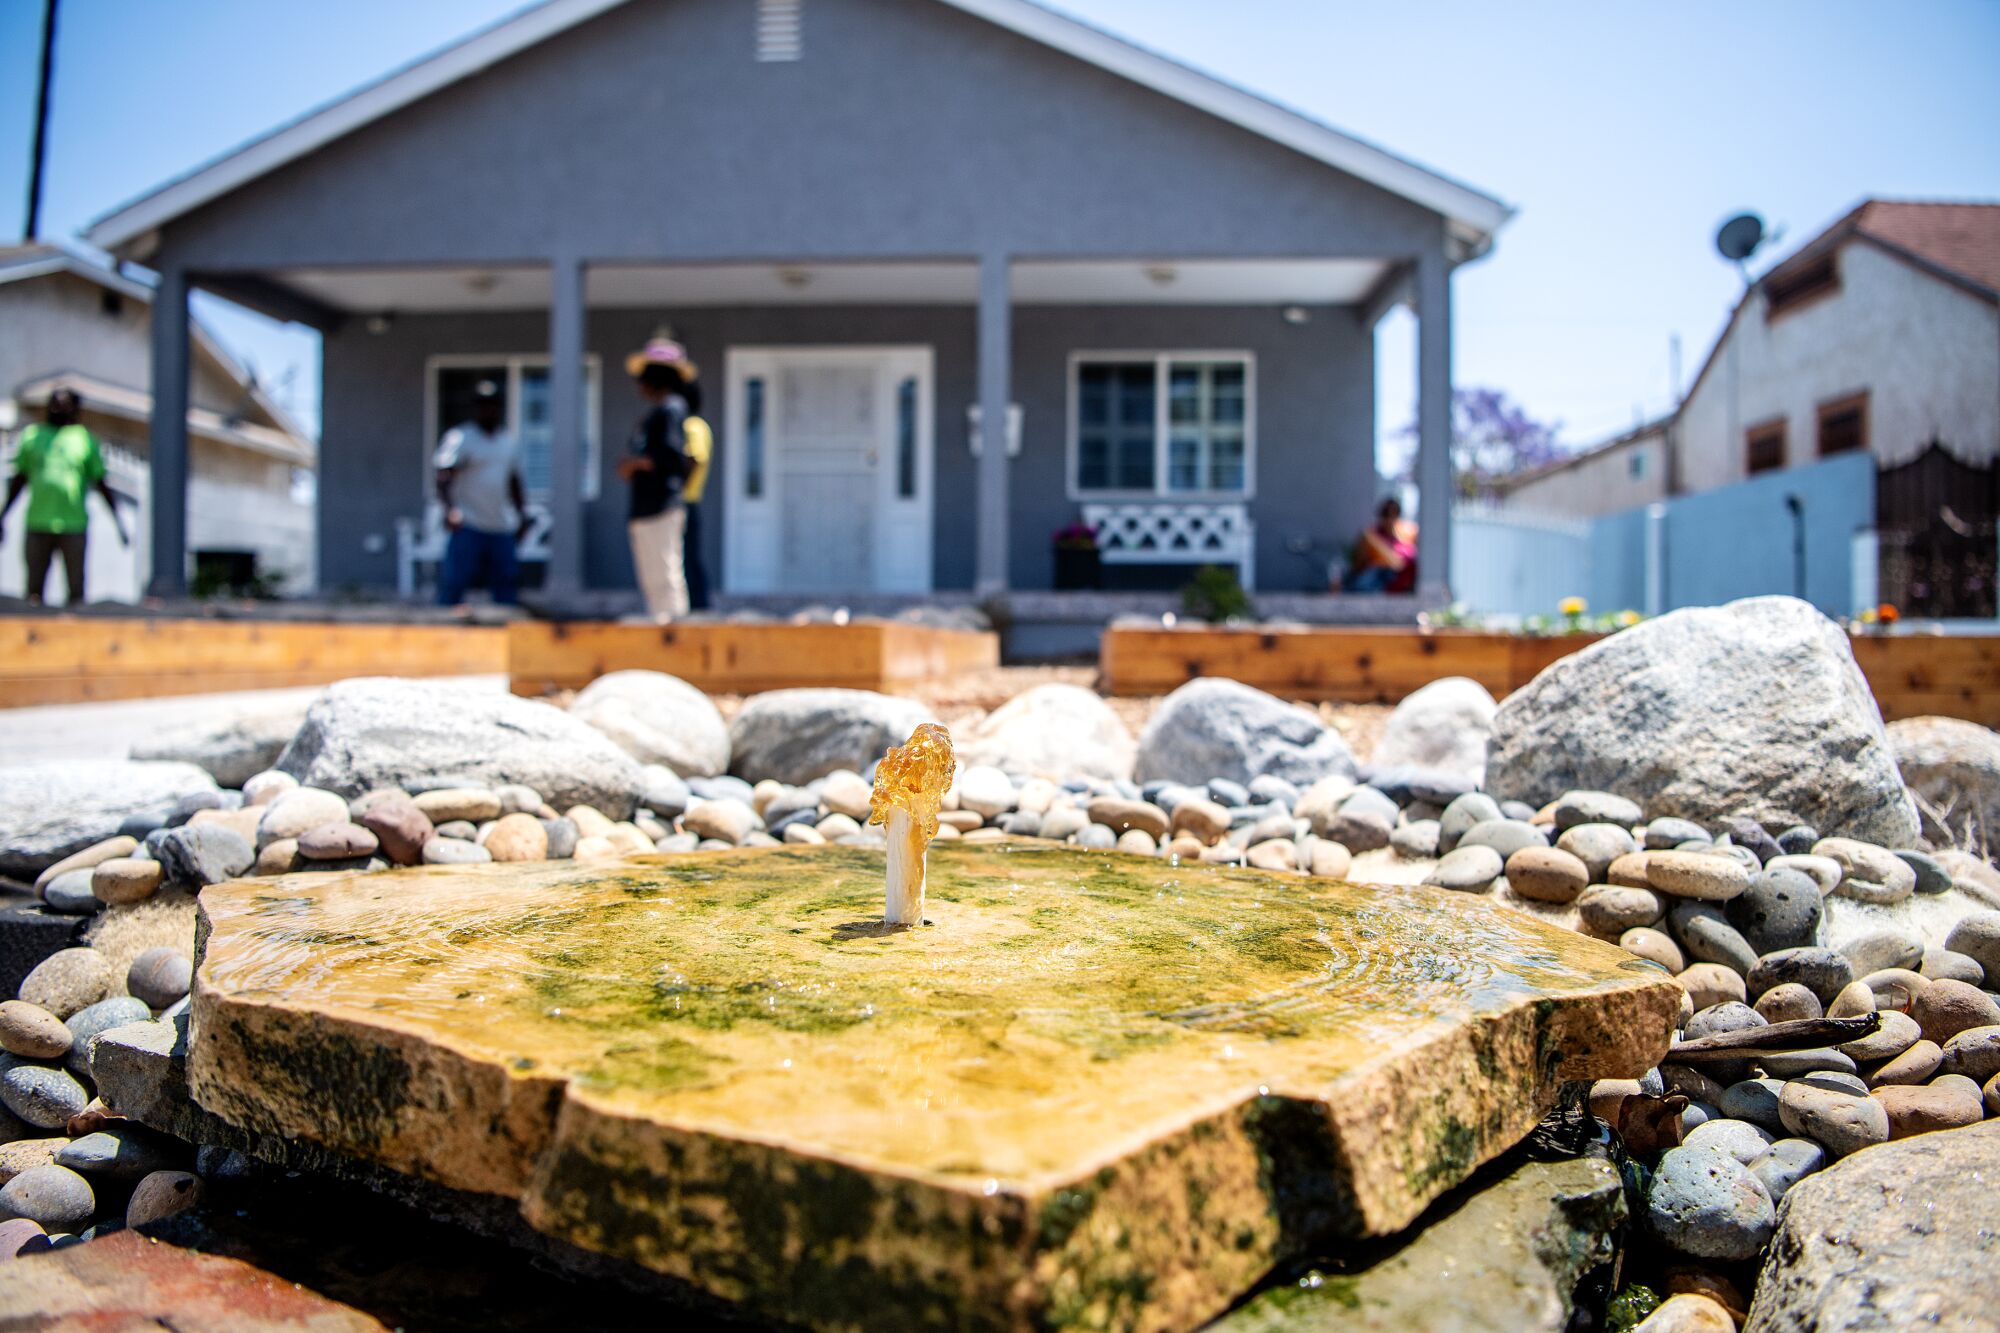 Water bubbles up from a pipe and flows out onto rocks in front of a house.